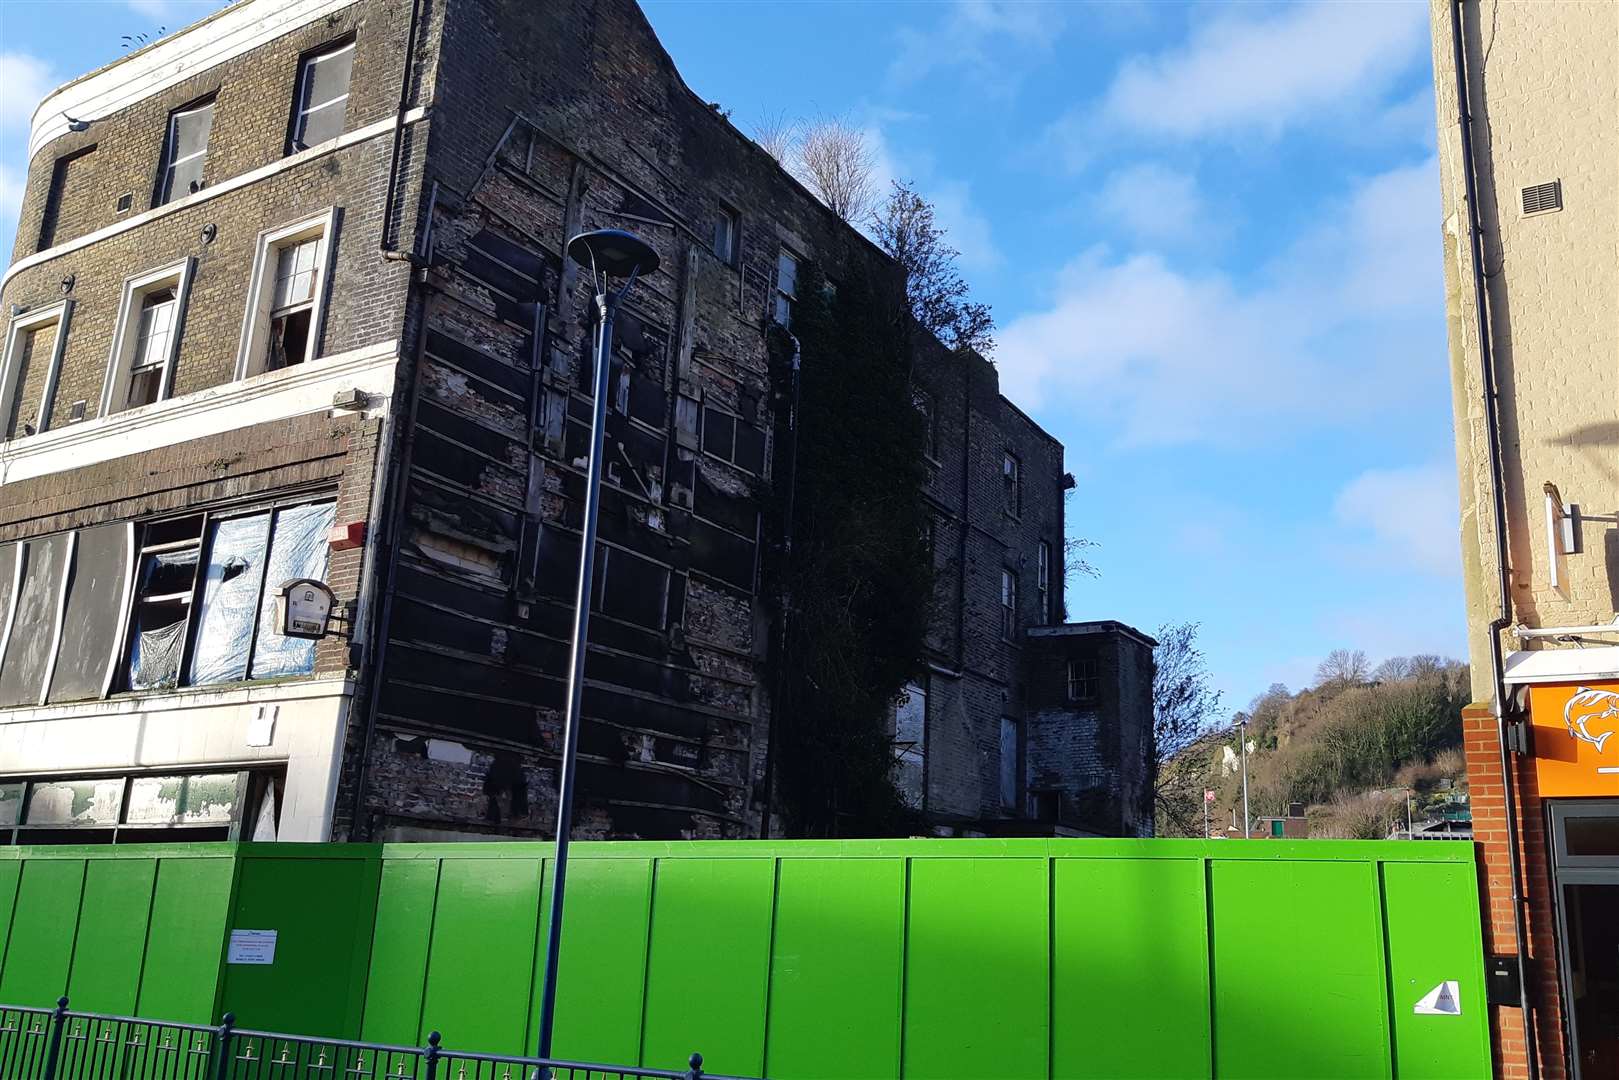 The gap between buildings at the Crypt restaurant site now. The land has never been used since